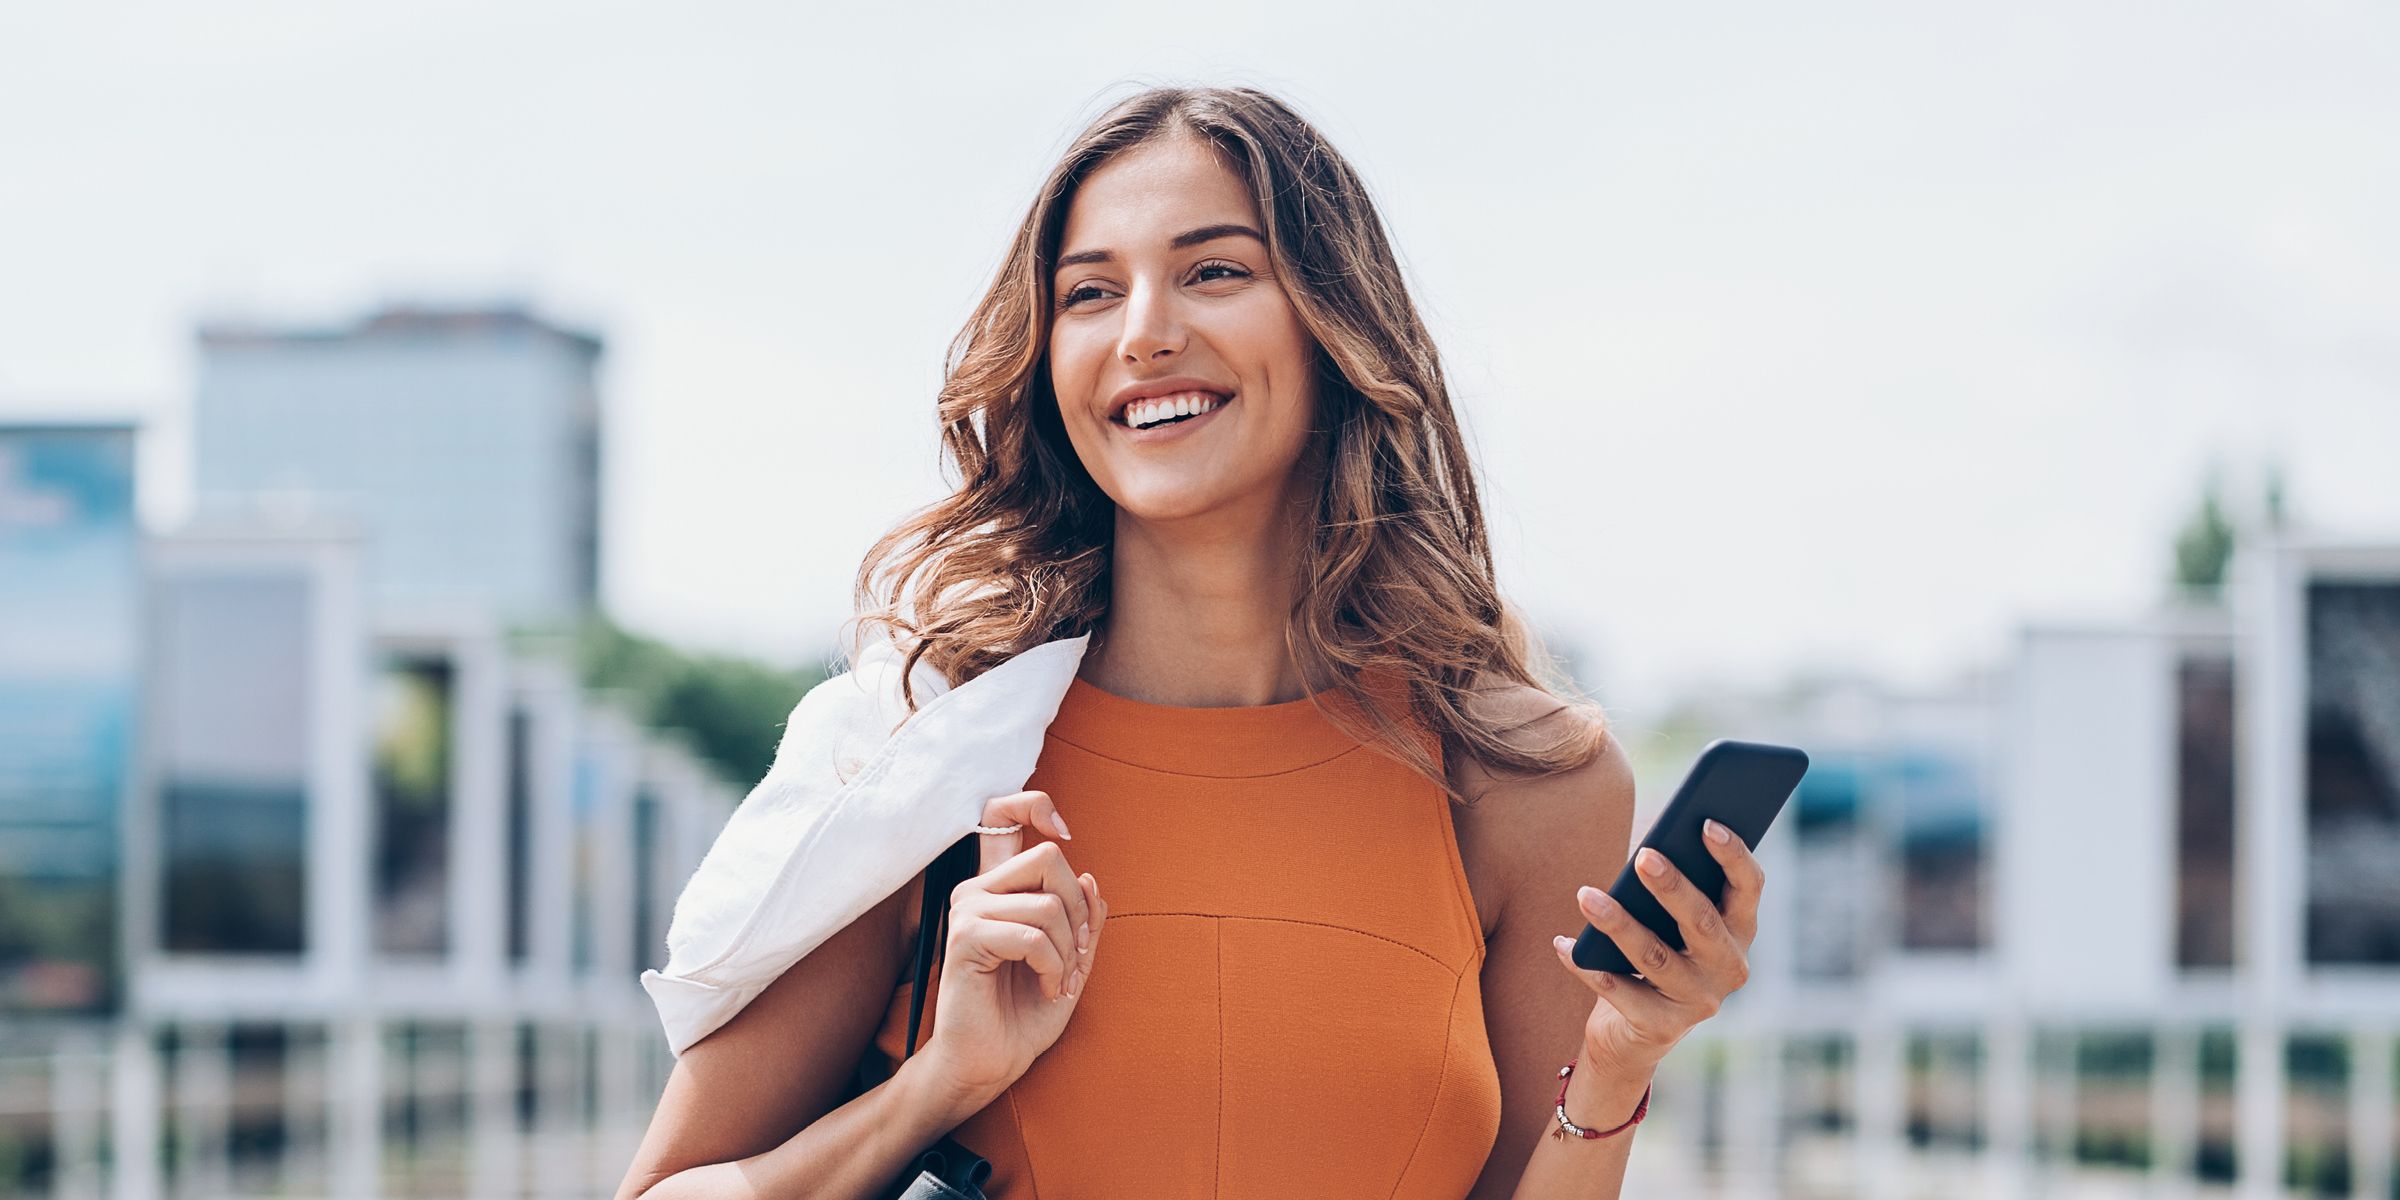 Woman smiling holding phone